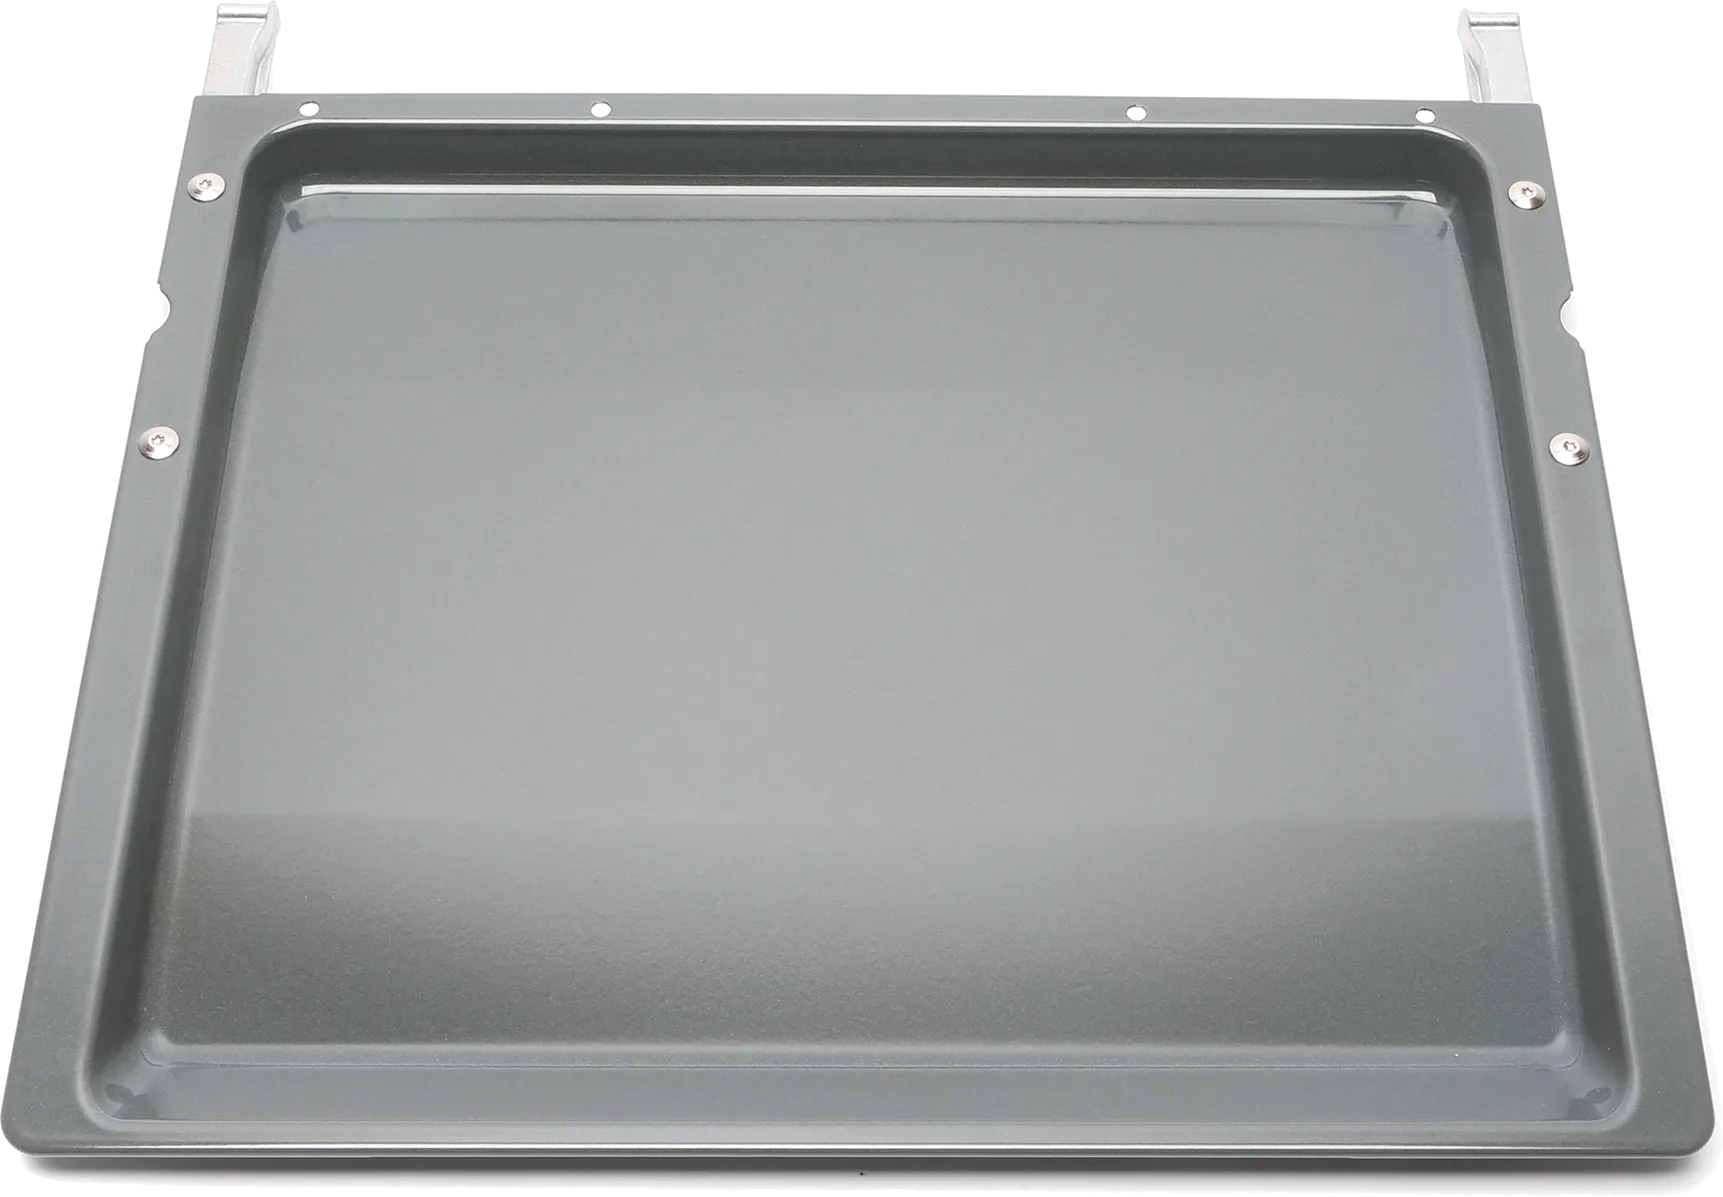 Baking tray enamel grey enamelbed with long holders, holder-set 645678 431 x 360 x 25 mm, non pyrolytic 